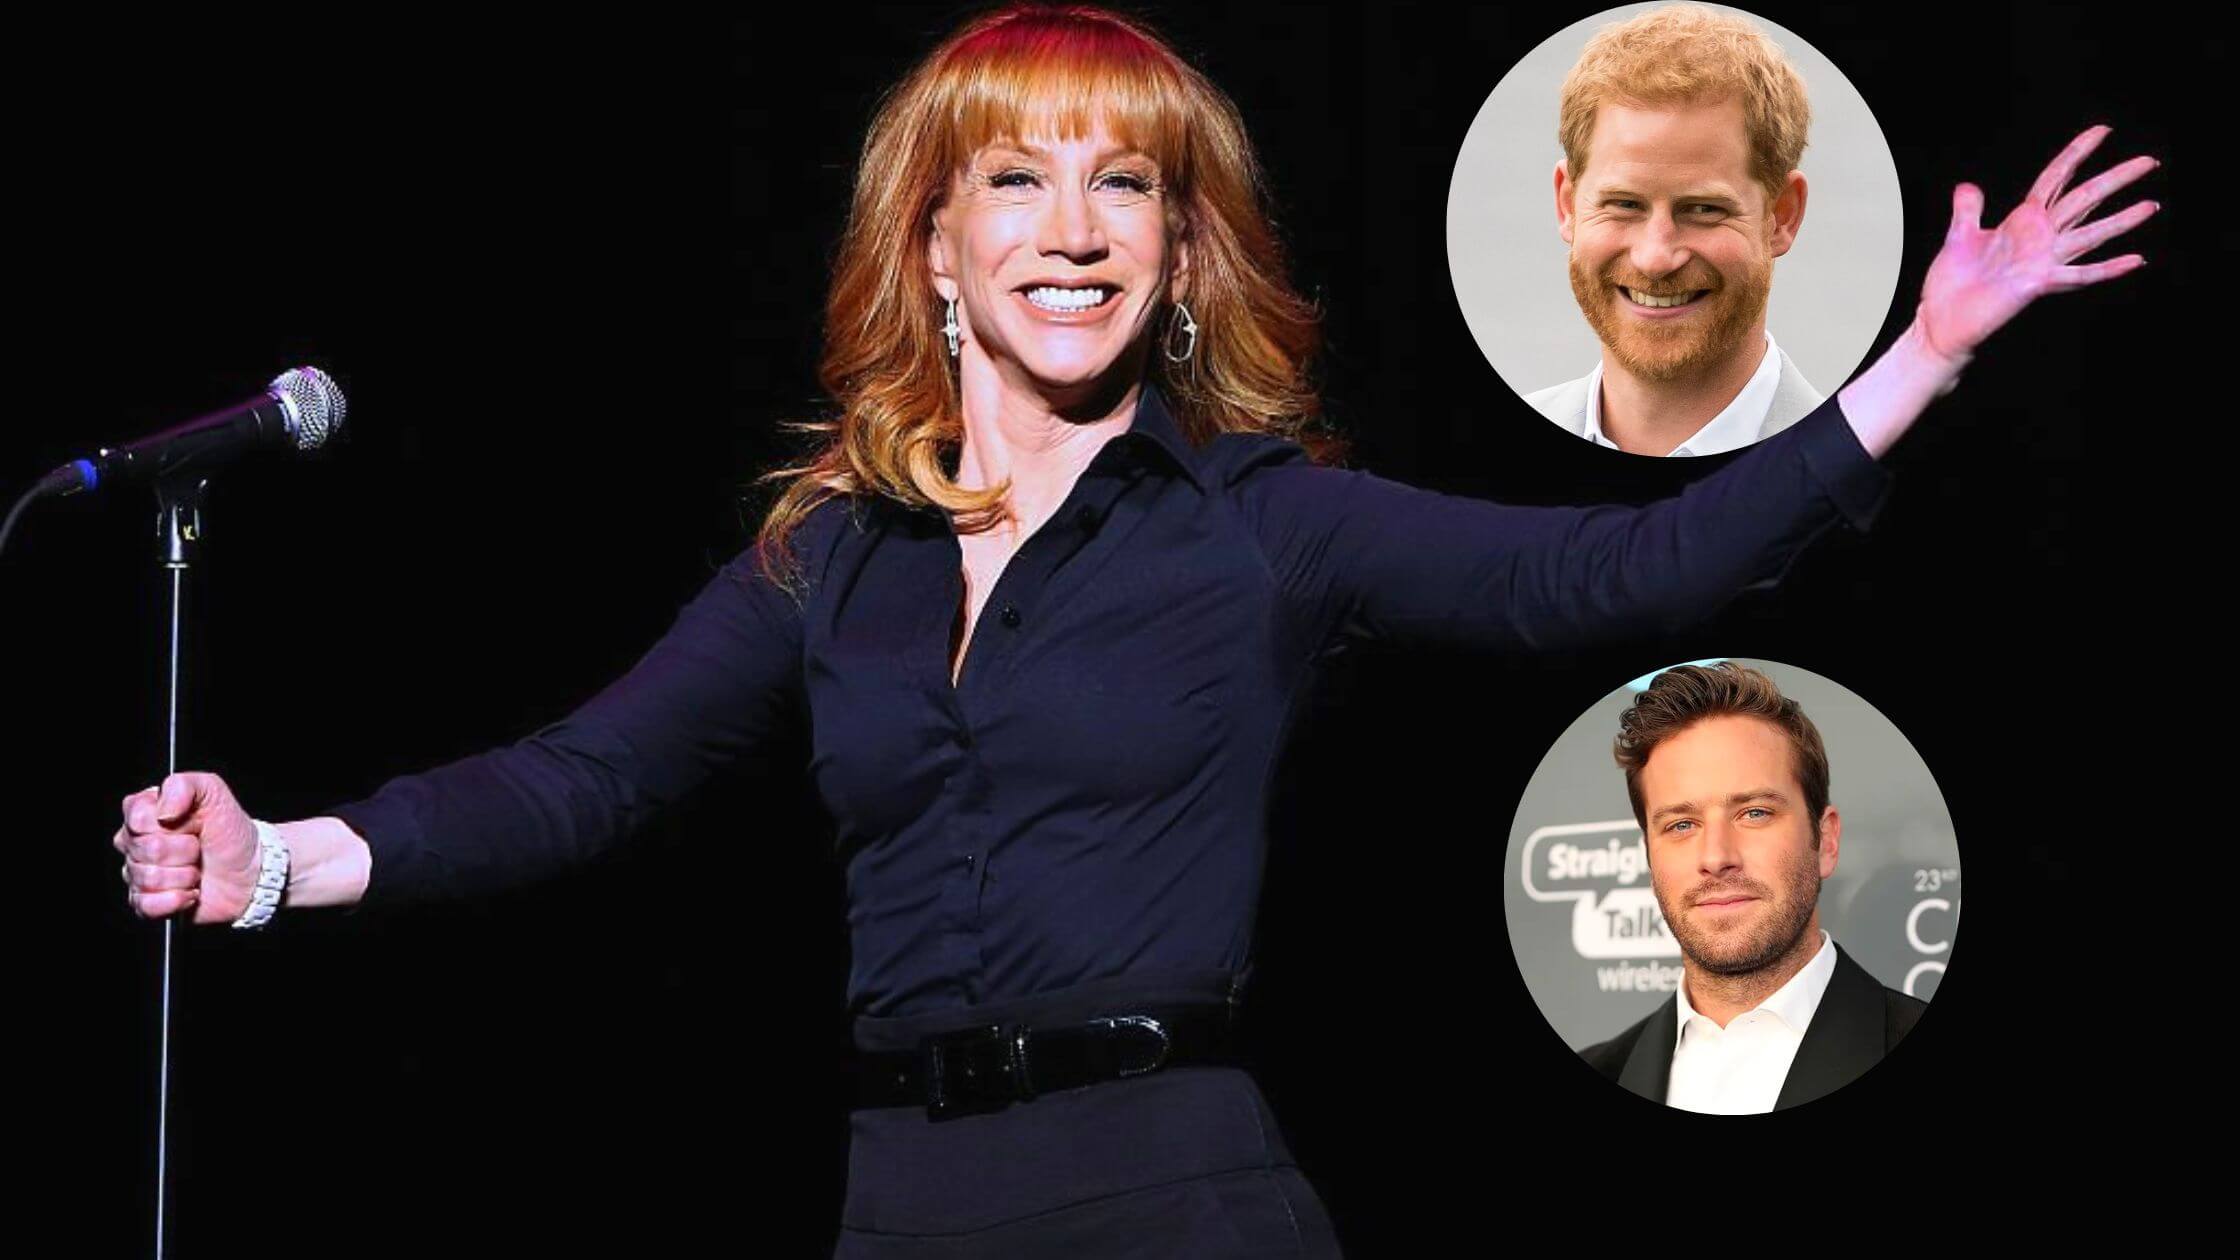 Kathy Griffin's Instagram Reveal Of Prince Harry Draws Comparisons To Actor Armie Hammer